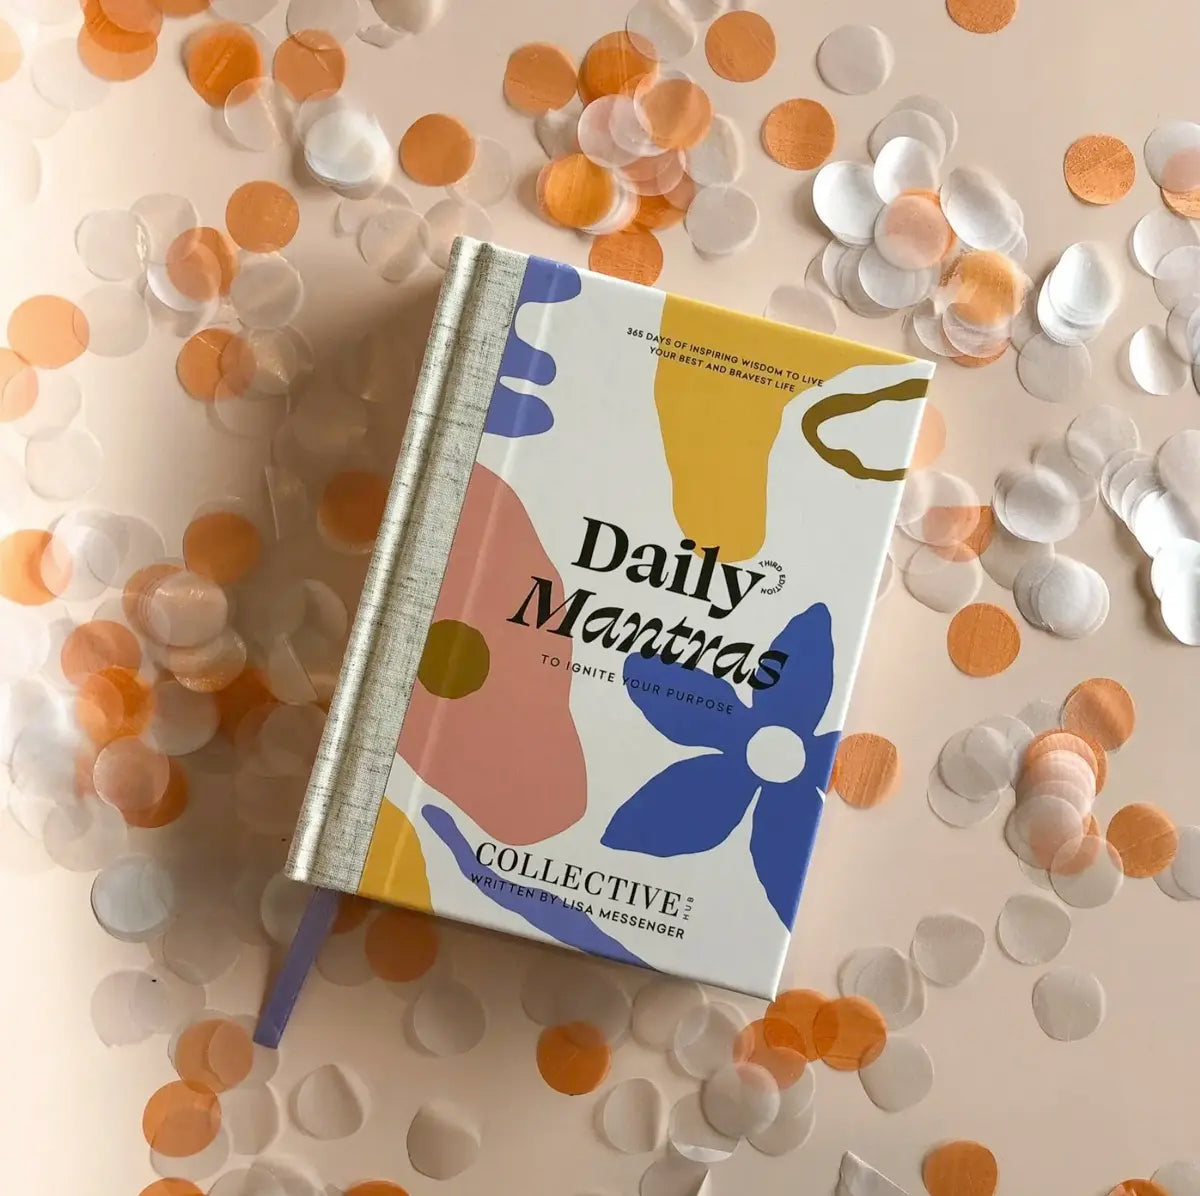 A curated book titled "Daily Mantras to Ignite Your Purpose - V3" by Collective Hub, filled with inspirational quotes, surrounded by confetti.